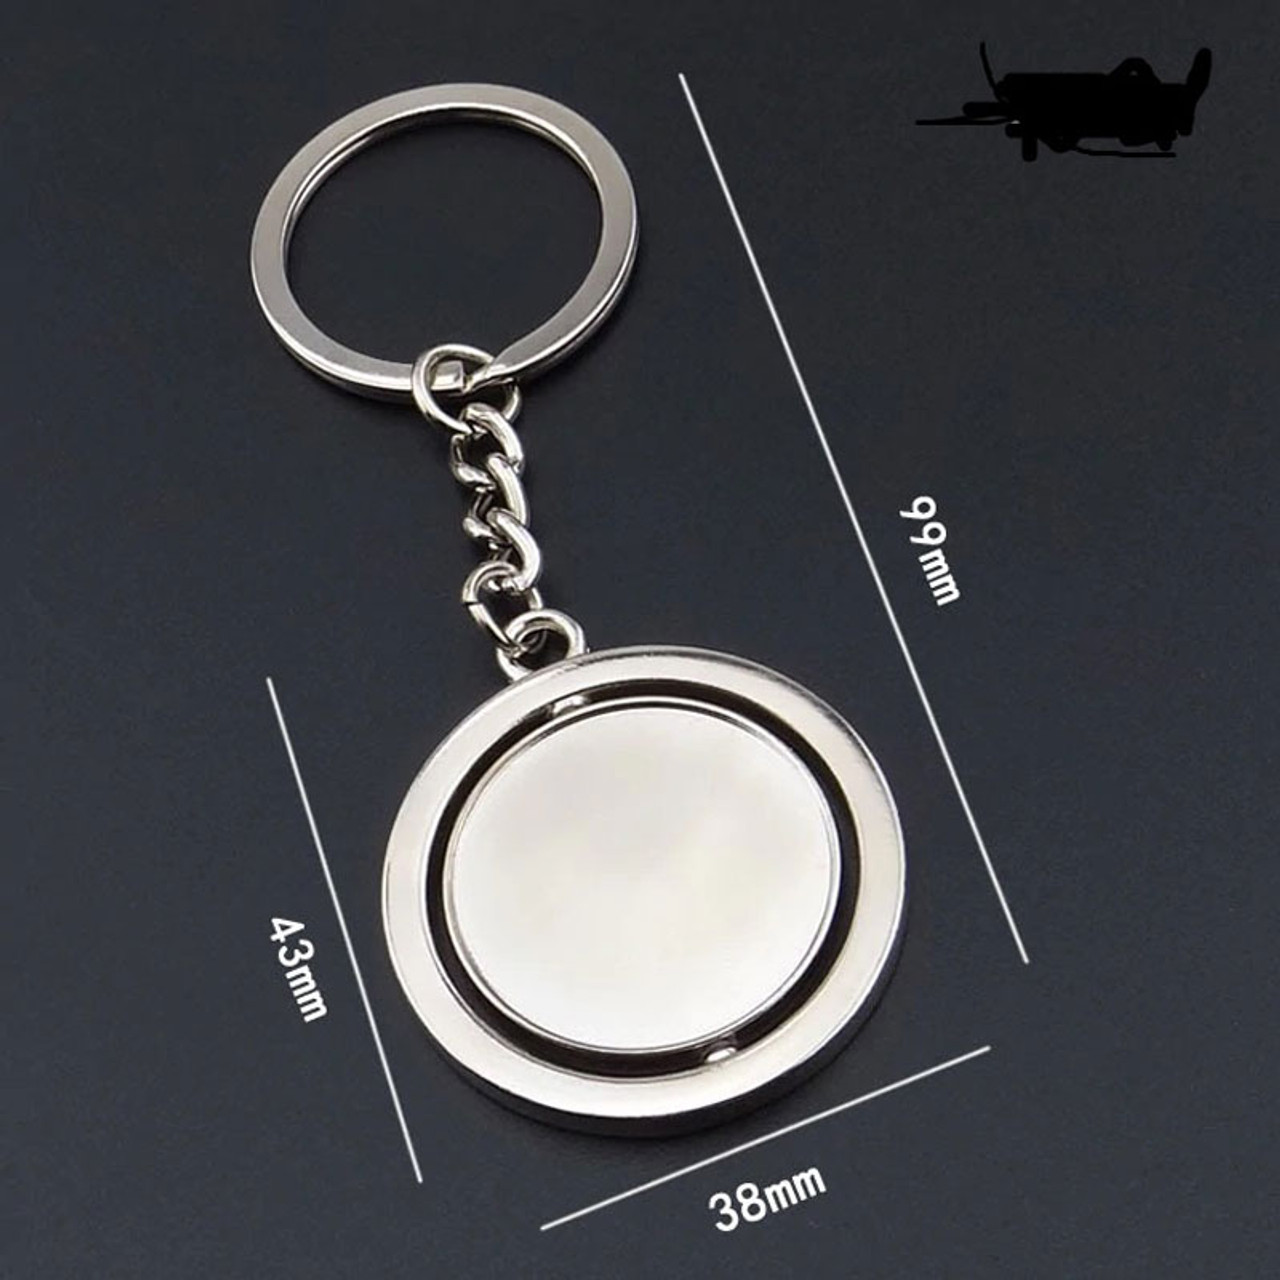 Stainless steel key ring 360° Spin Cowhide keychain FEGVE